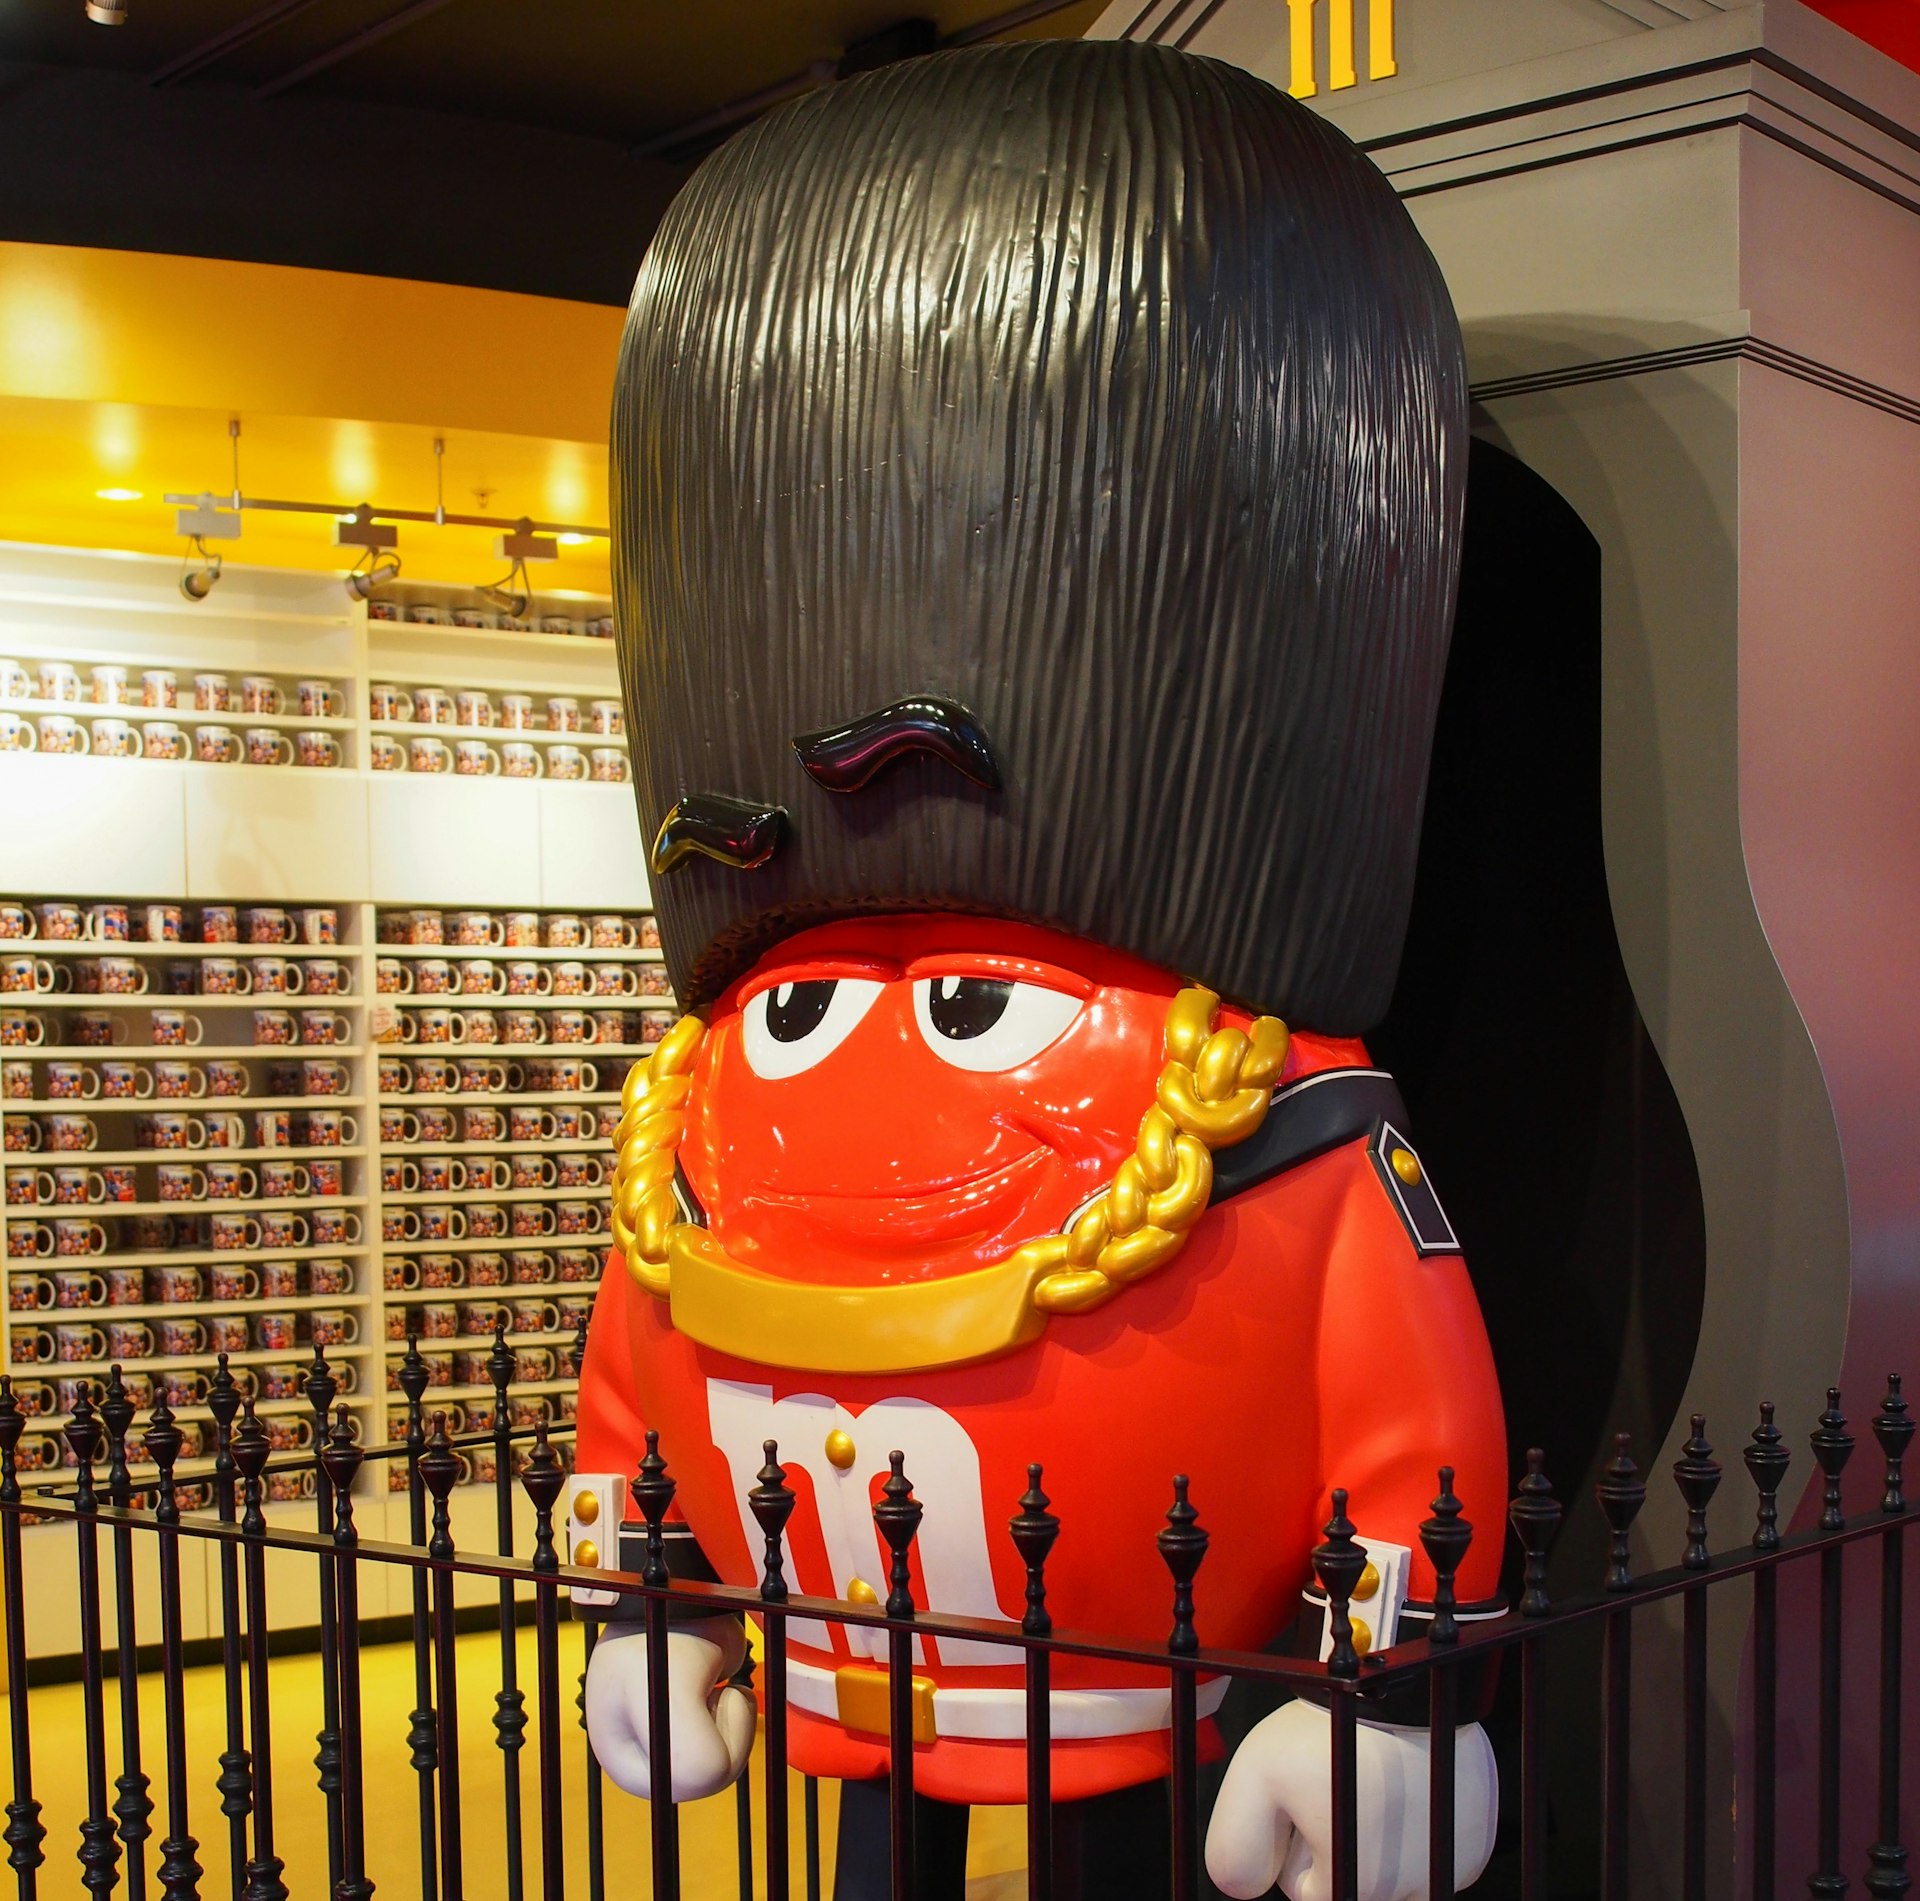 A life-sized red M&M figurine in a King’s Guard costume at M&M’s London store, London, England, United Kingdom